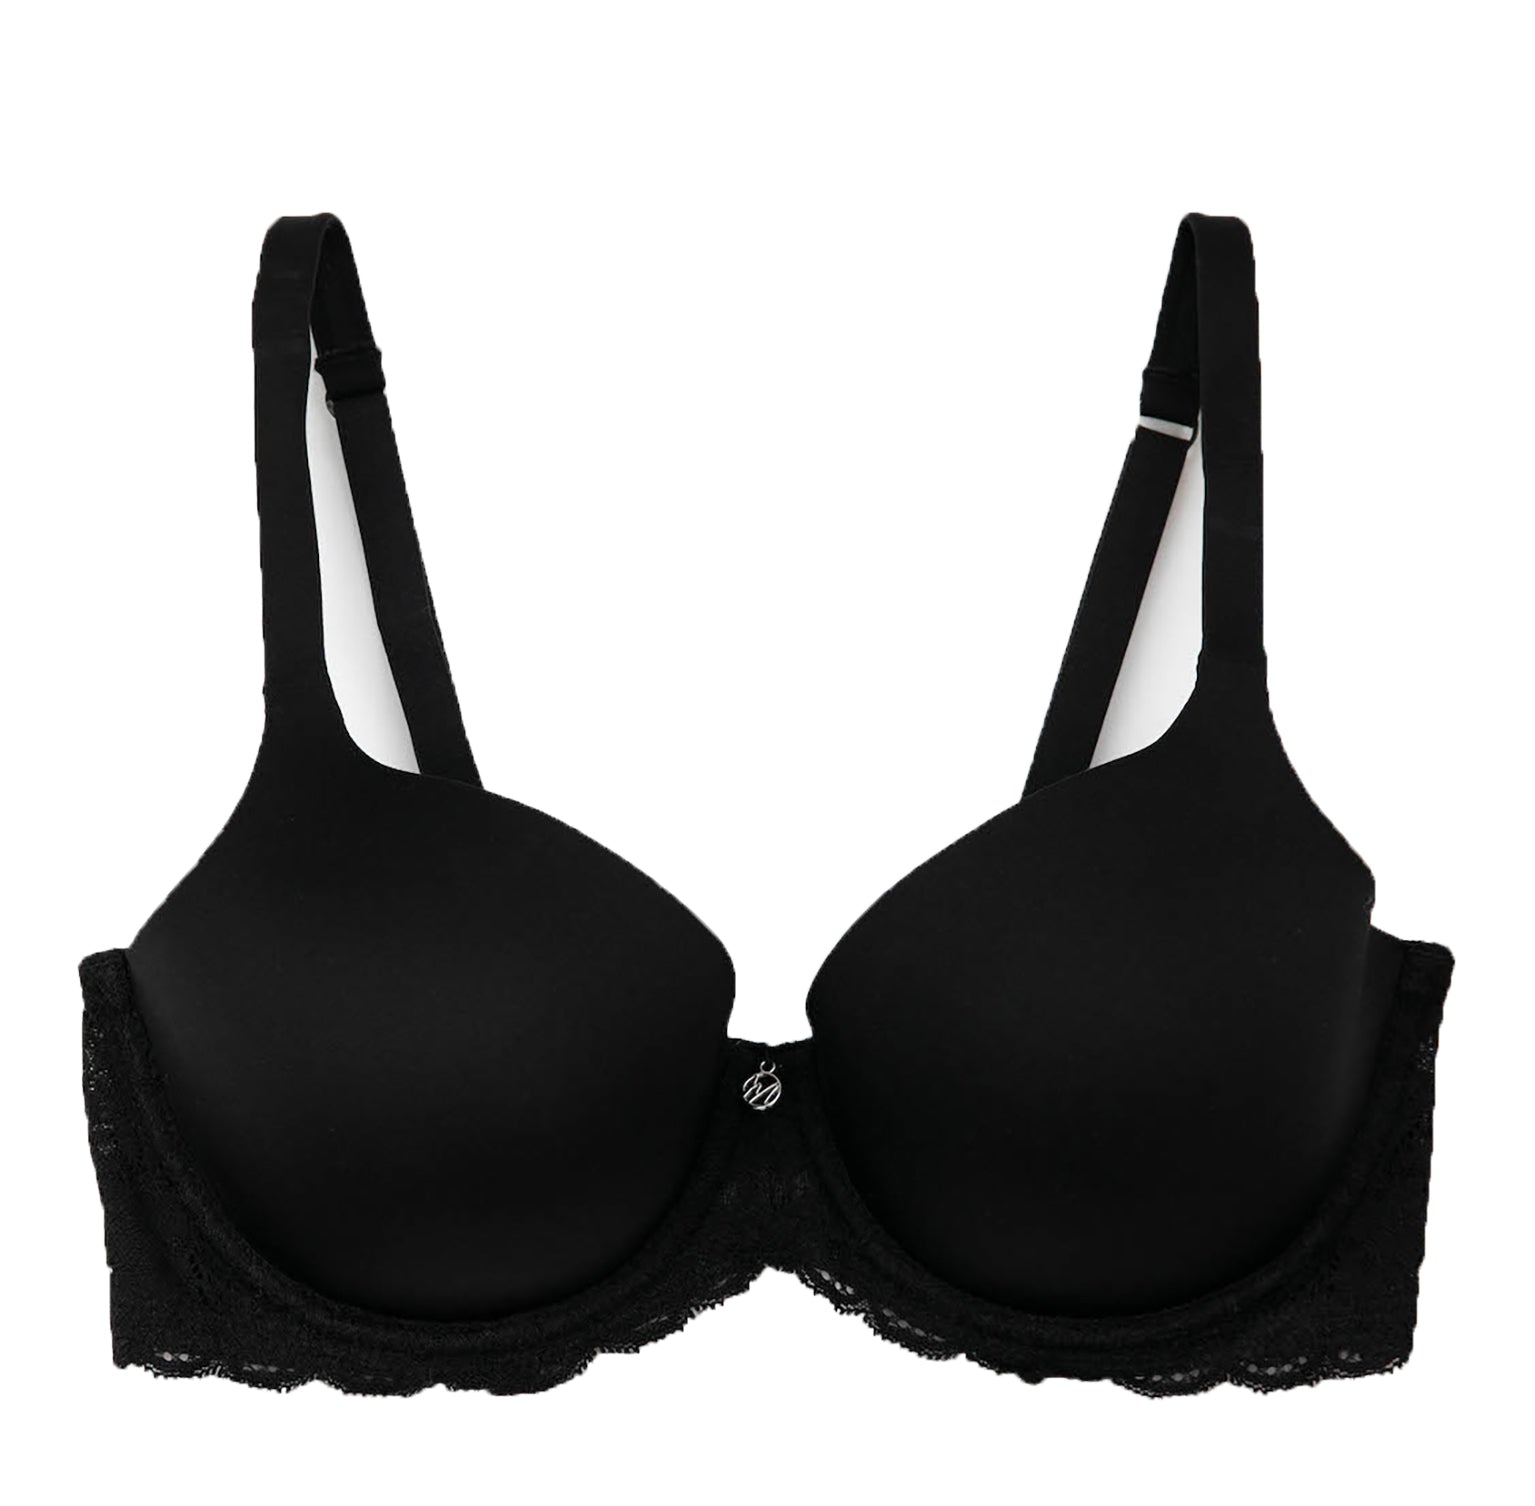 Full Coverage Bras, Shapers, and Briefs – We Fit Lingerie